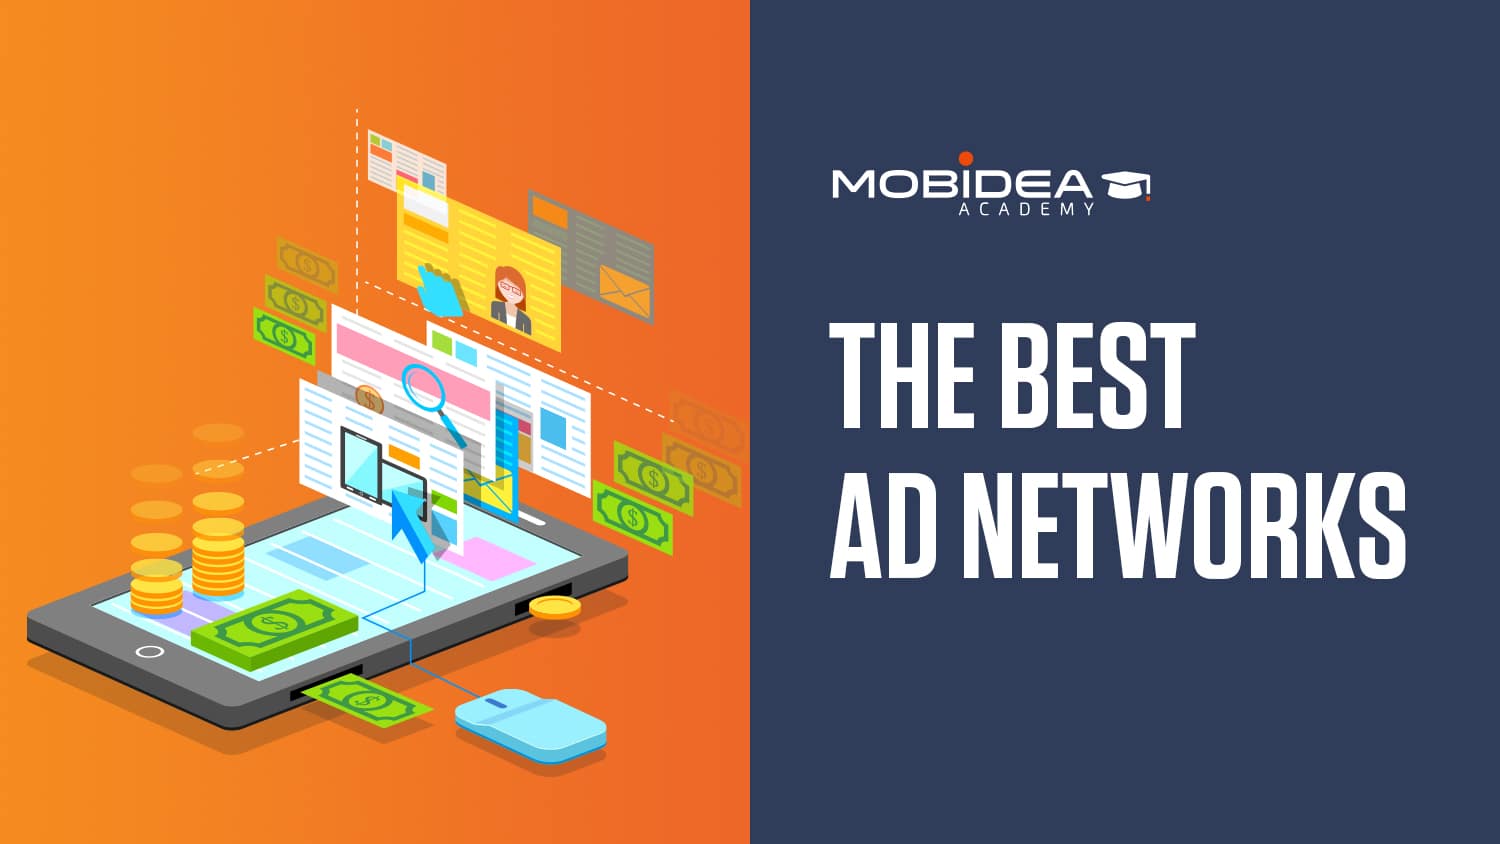 5 Best CPM Advertising Networks for Publishers - 2023 Edition